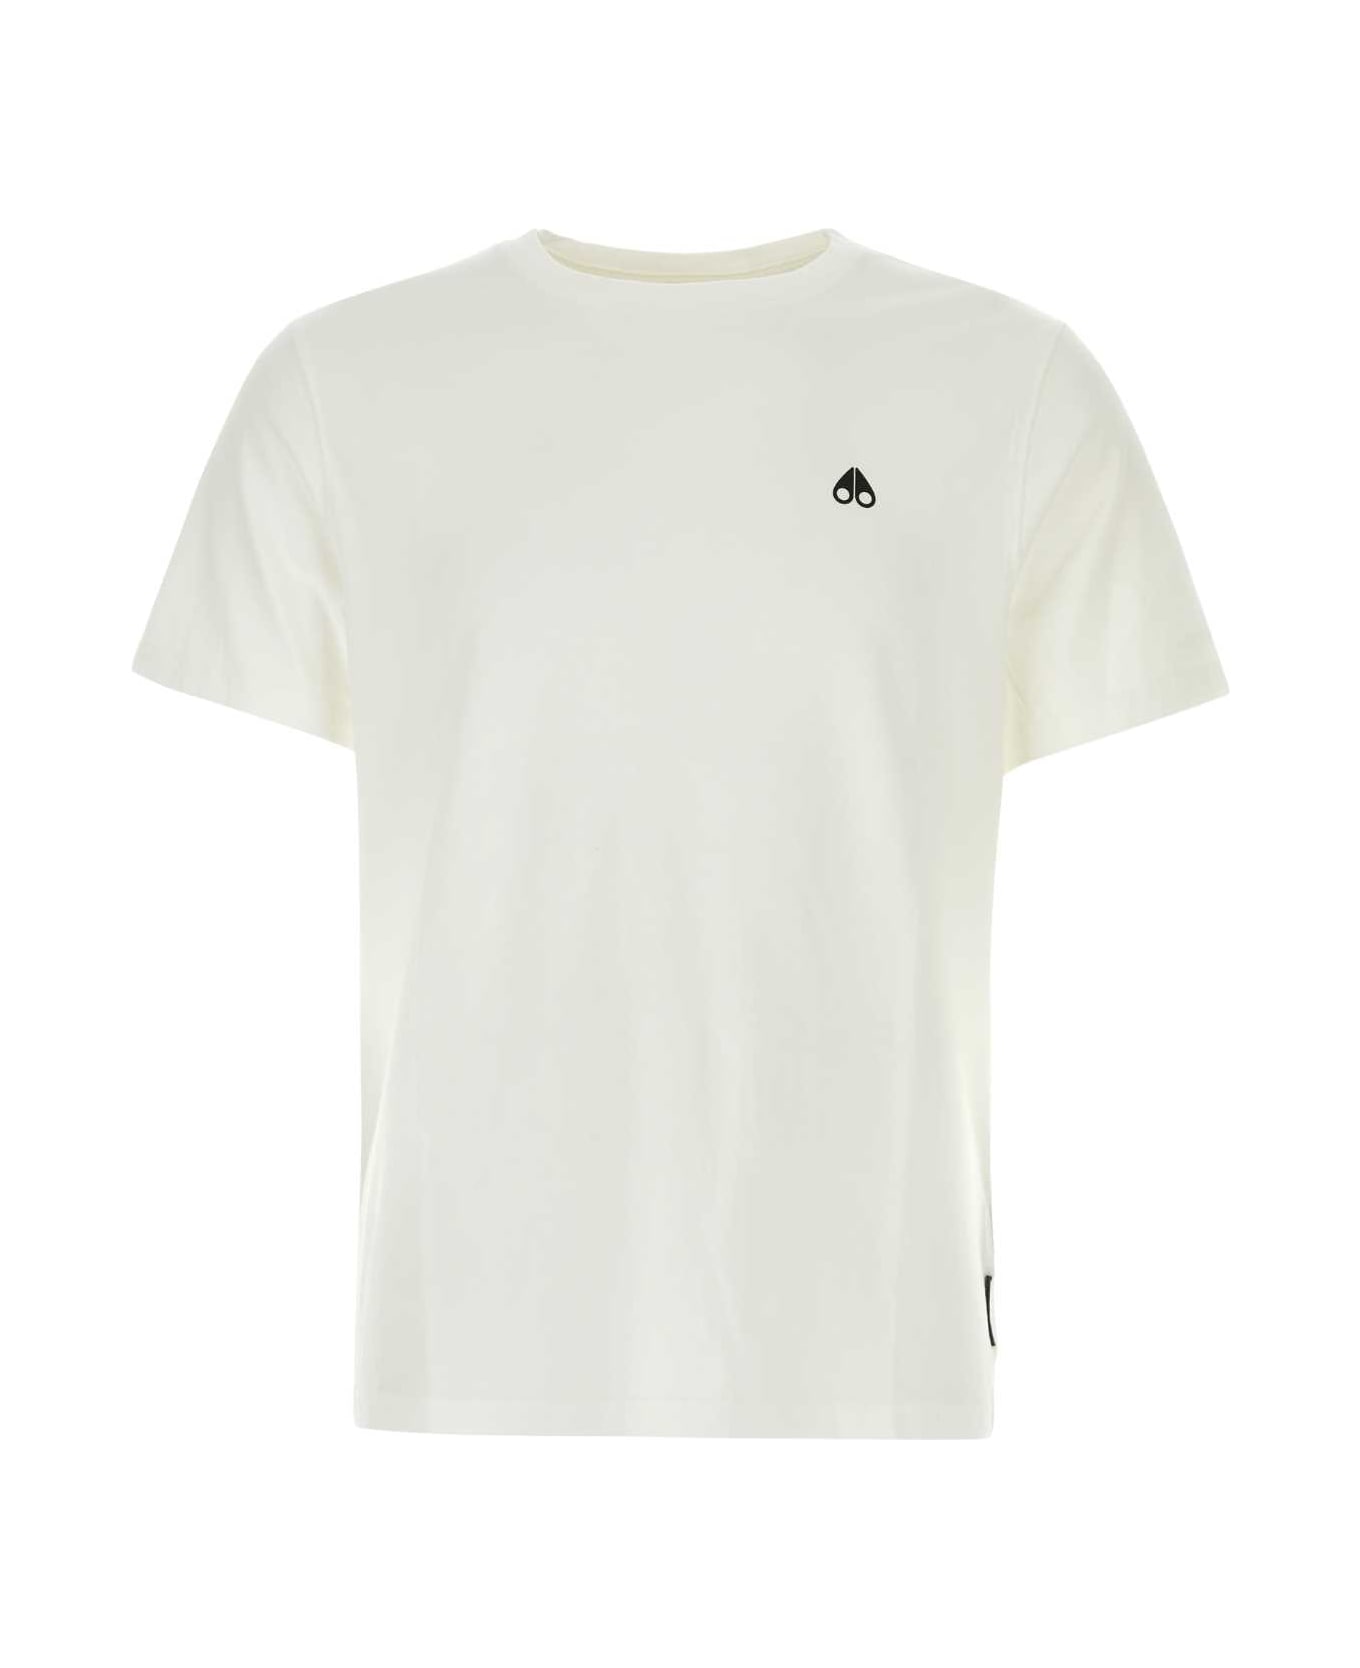 Moose Knuckles White Cotton T-shirt - WHITE